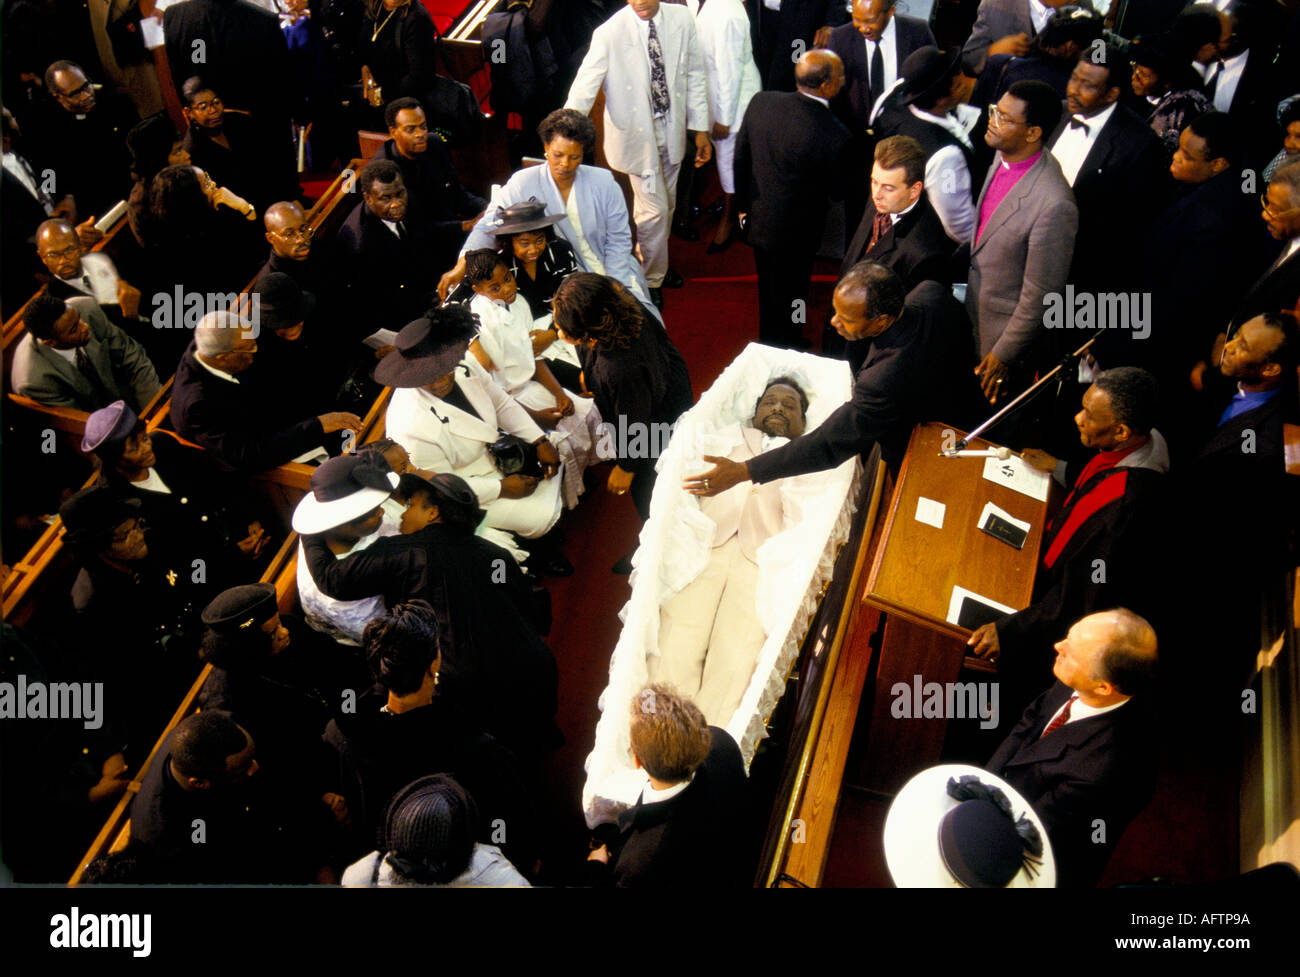 Mourners sitting in pews with corpse in open  coffin at funeral service in church New  Testament Church of God London Stock Photo